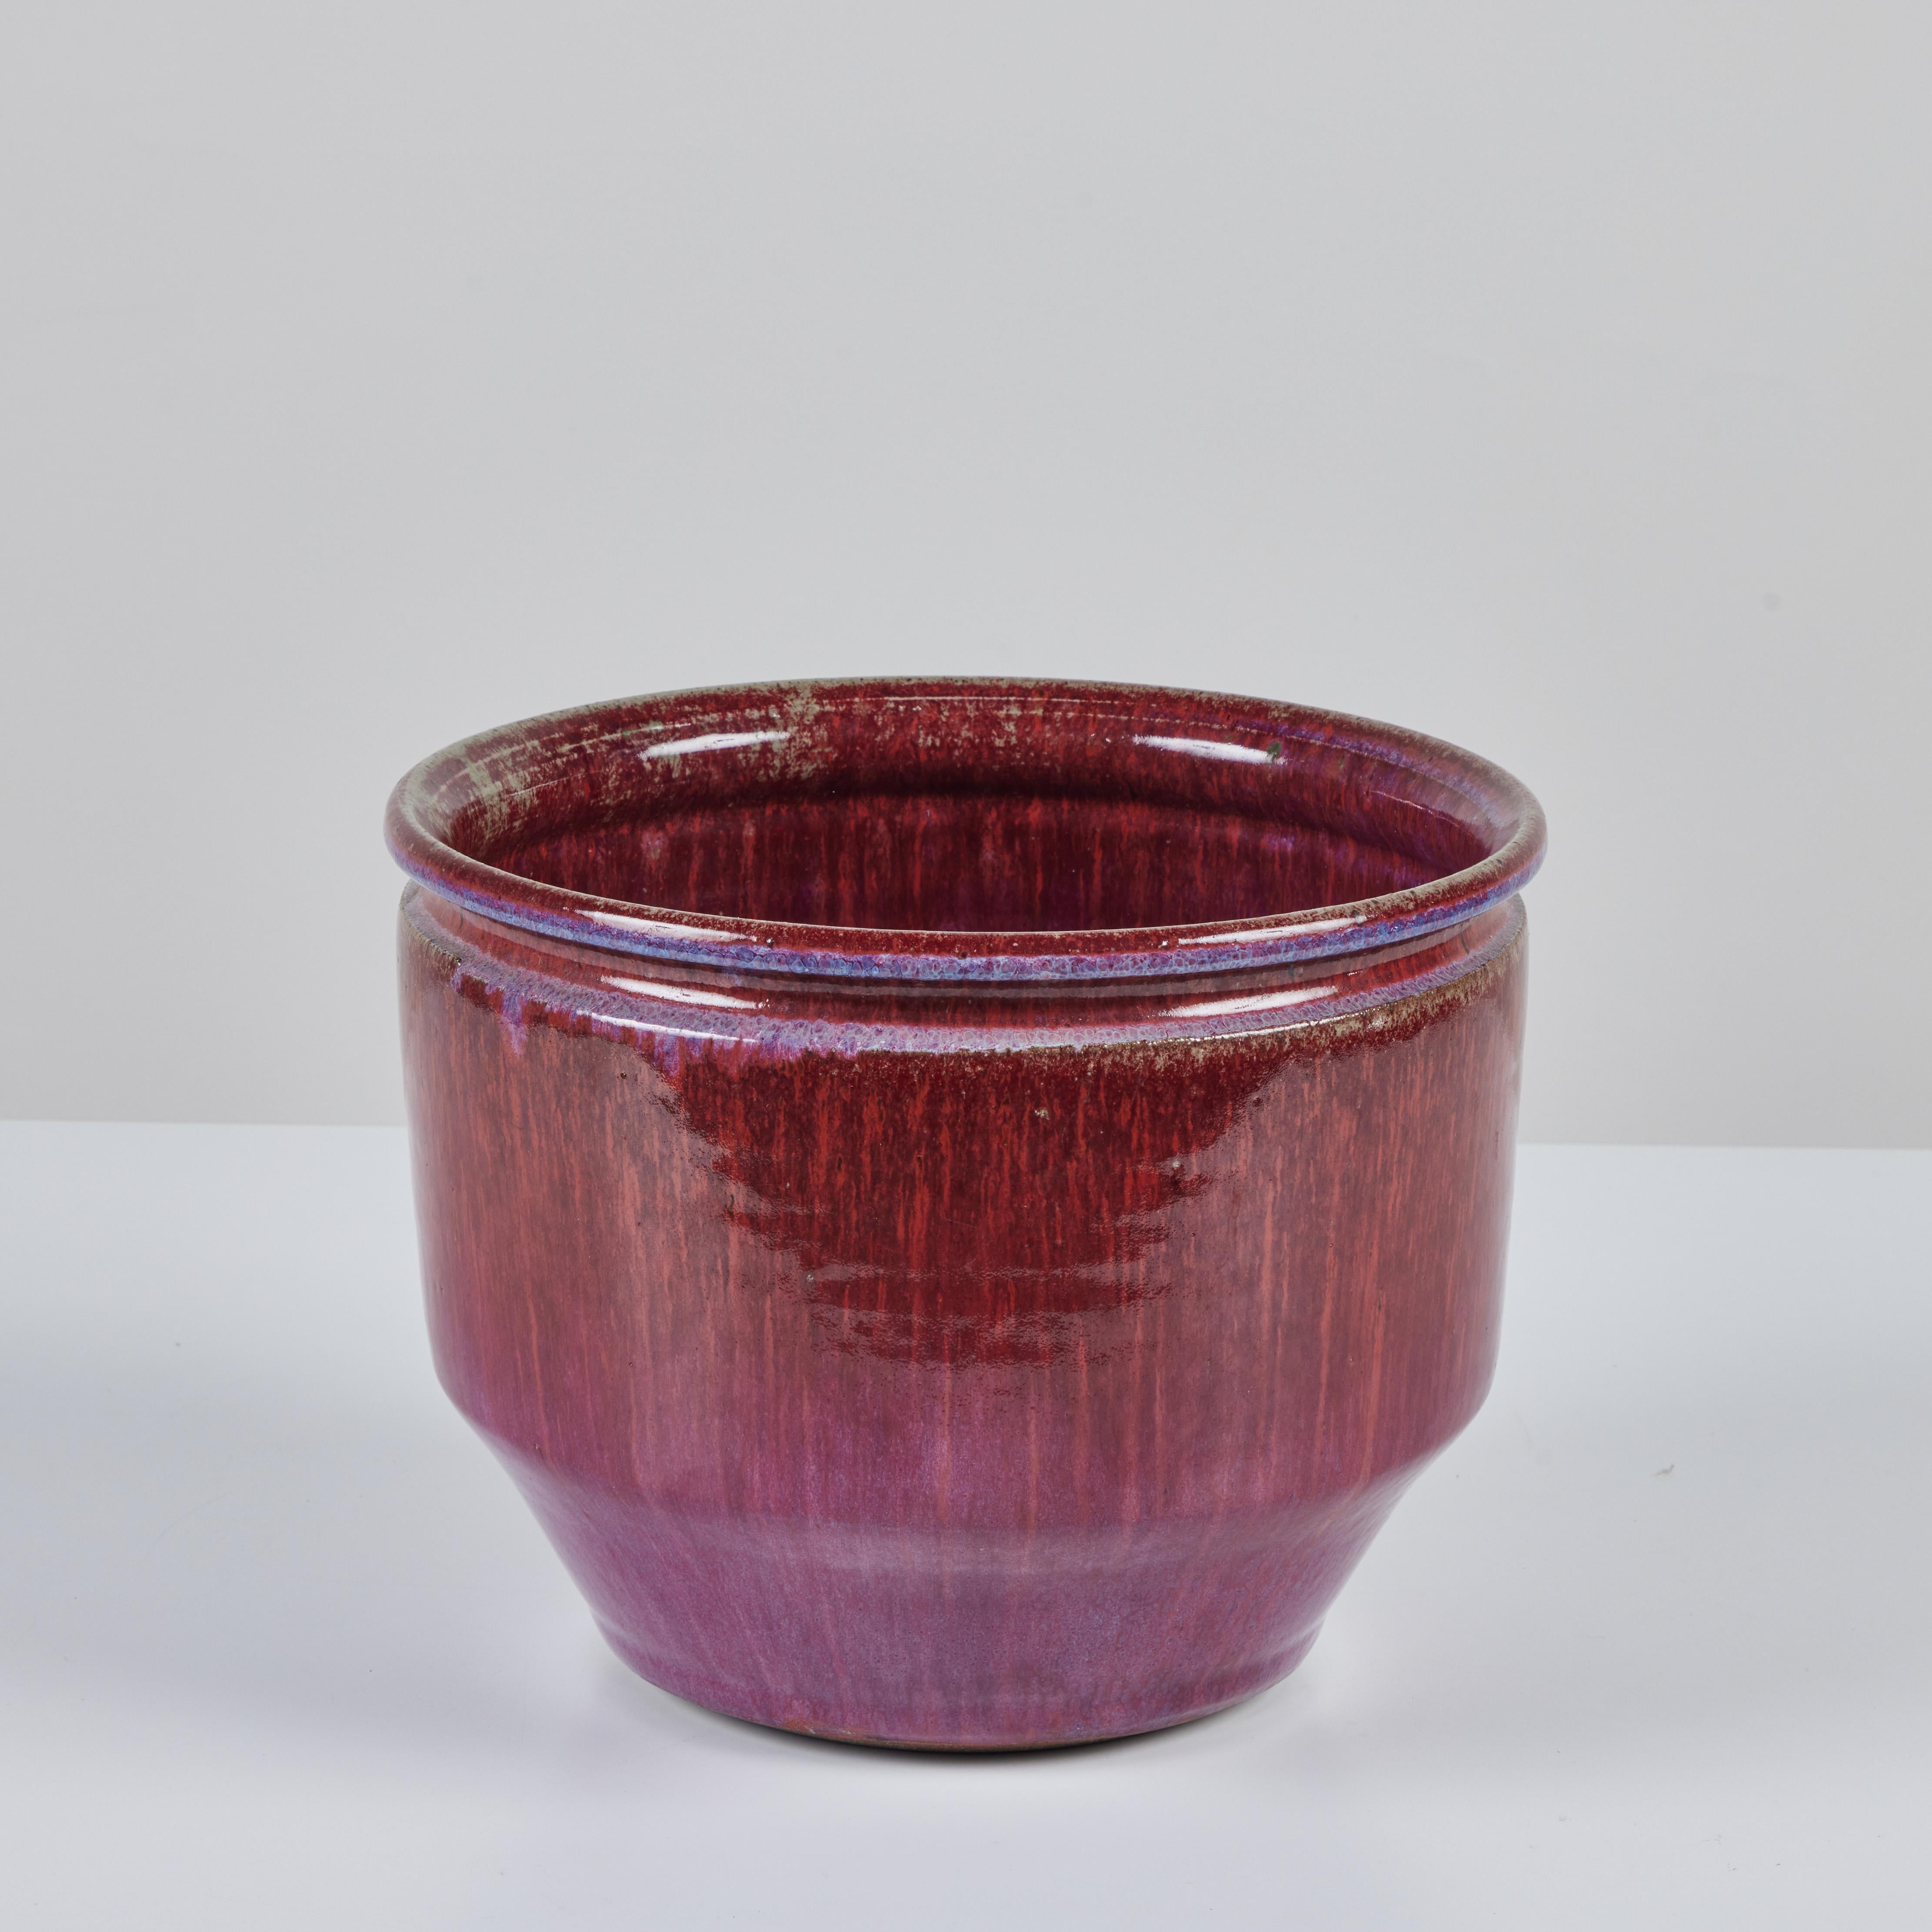 Ceramic David Cressey and Robert Maxwell Ombre Glazed Table Top Planter for Earthgender